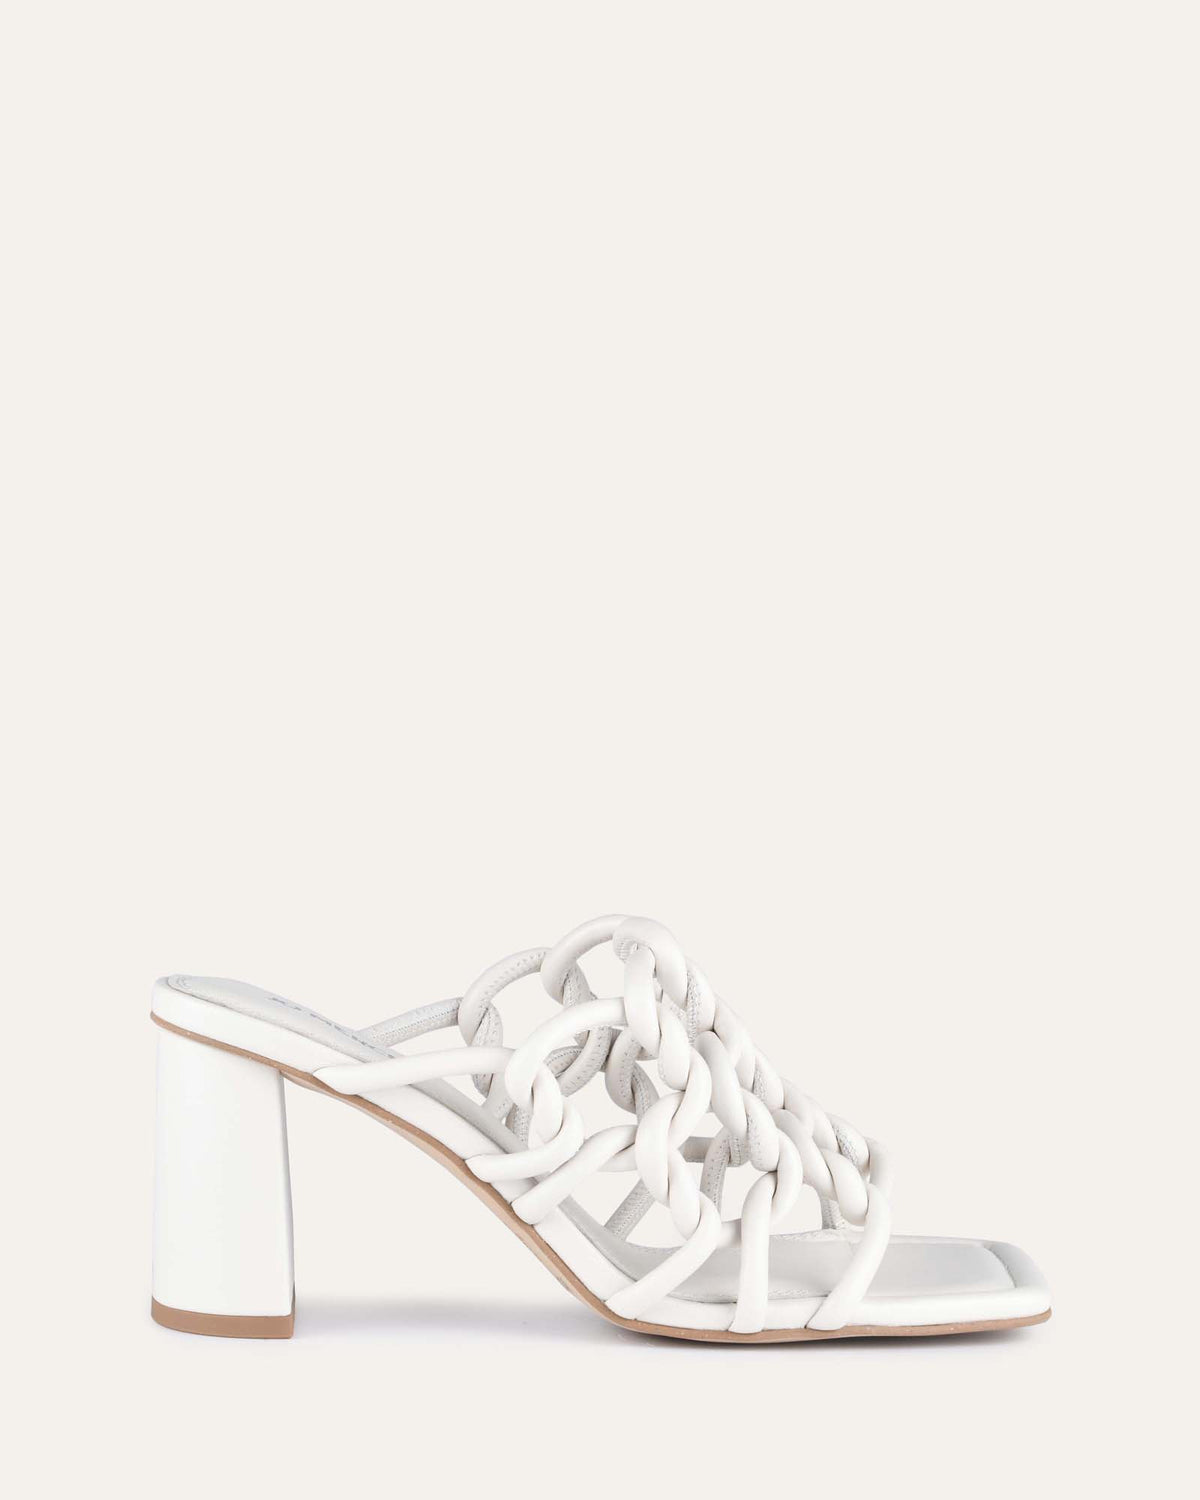 KASSI HIGH HEEL SANDALS OFF WHITE LEATHER